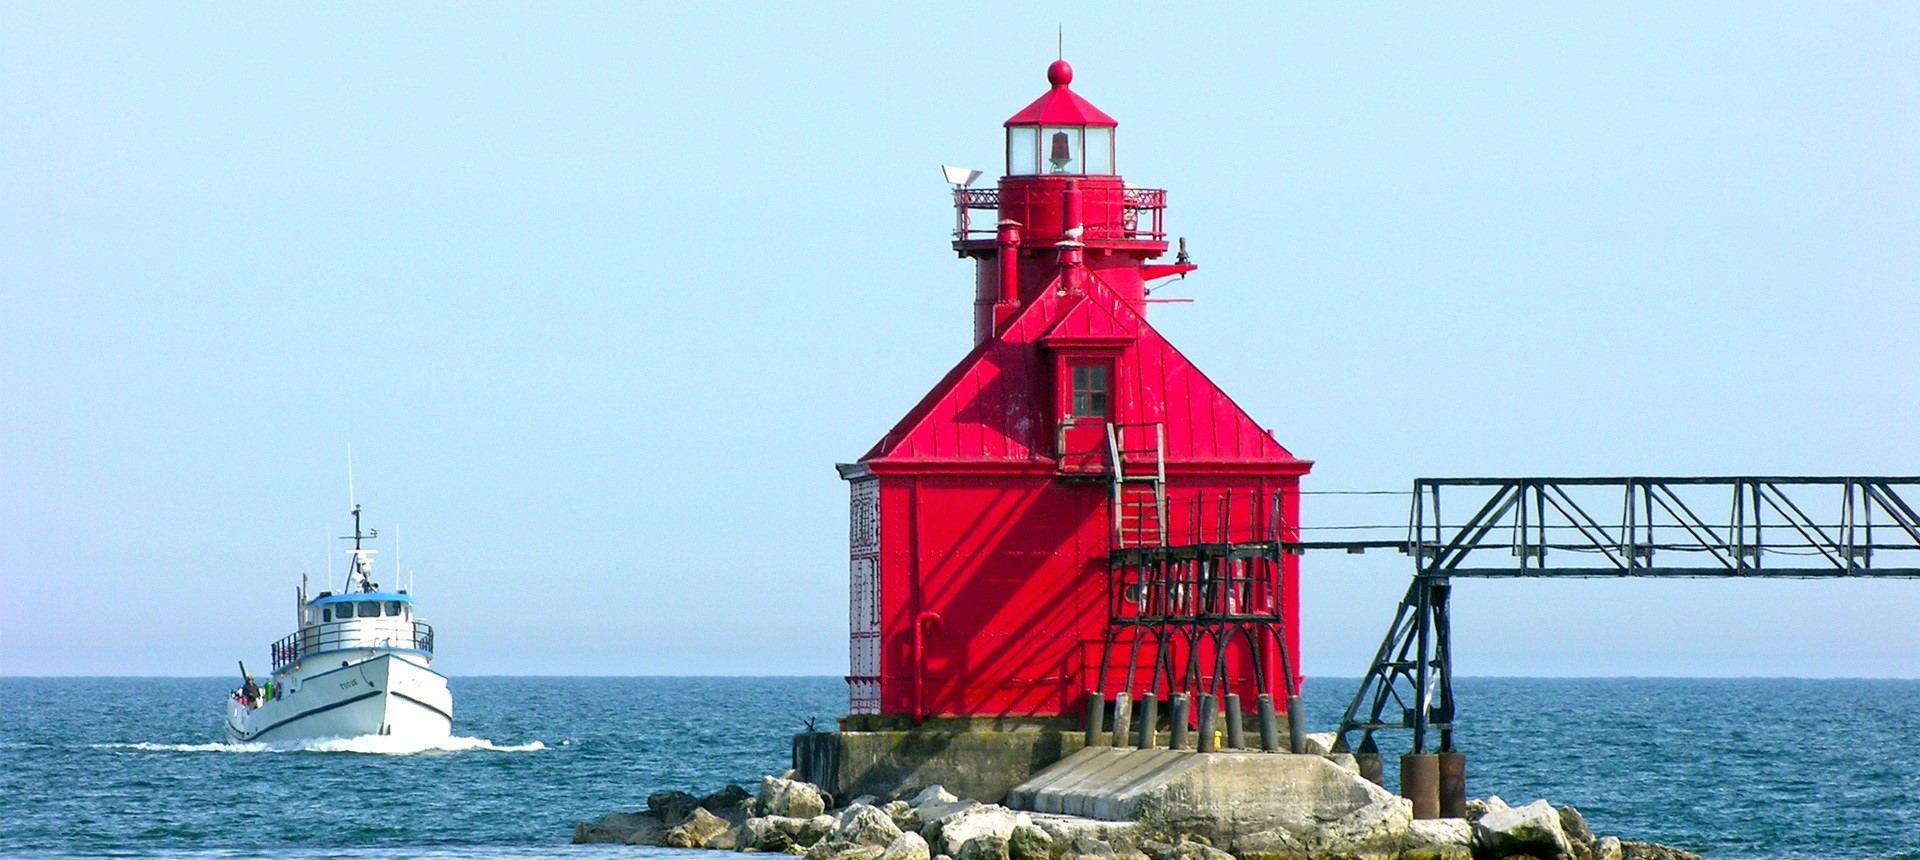 Red lighthouse on a rocky outcropping with a boat coming in